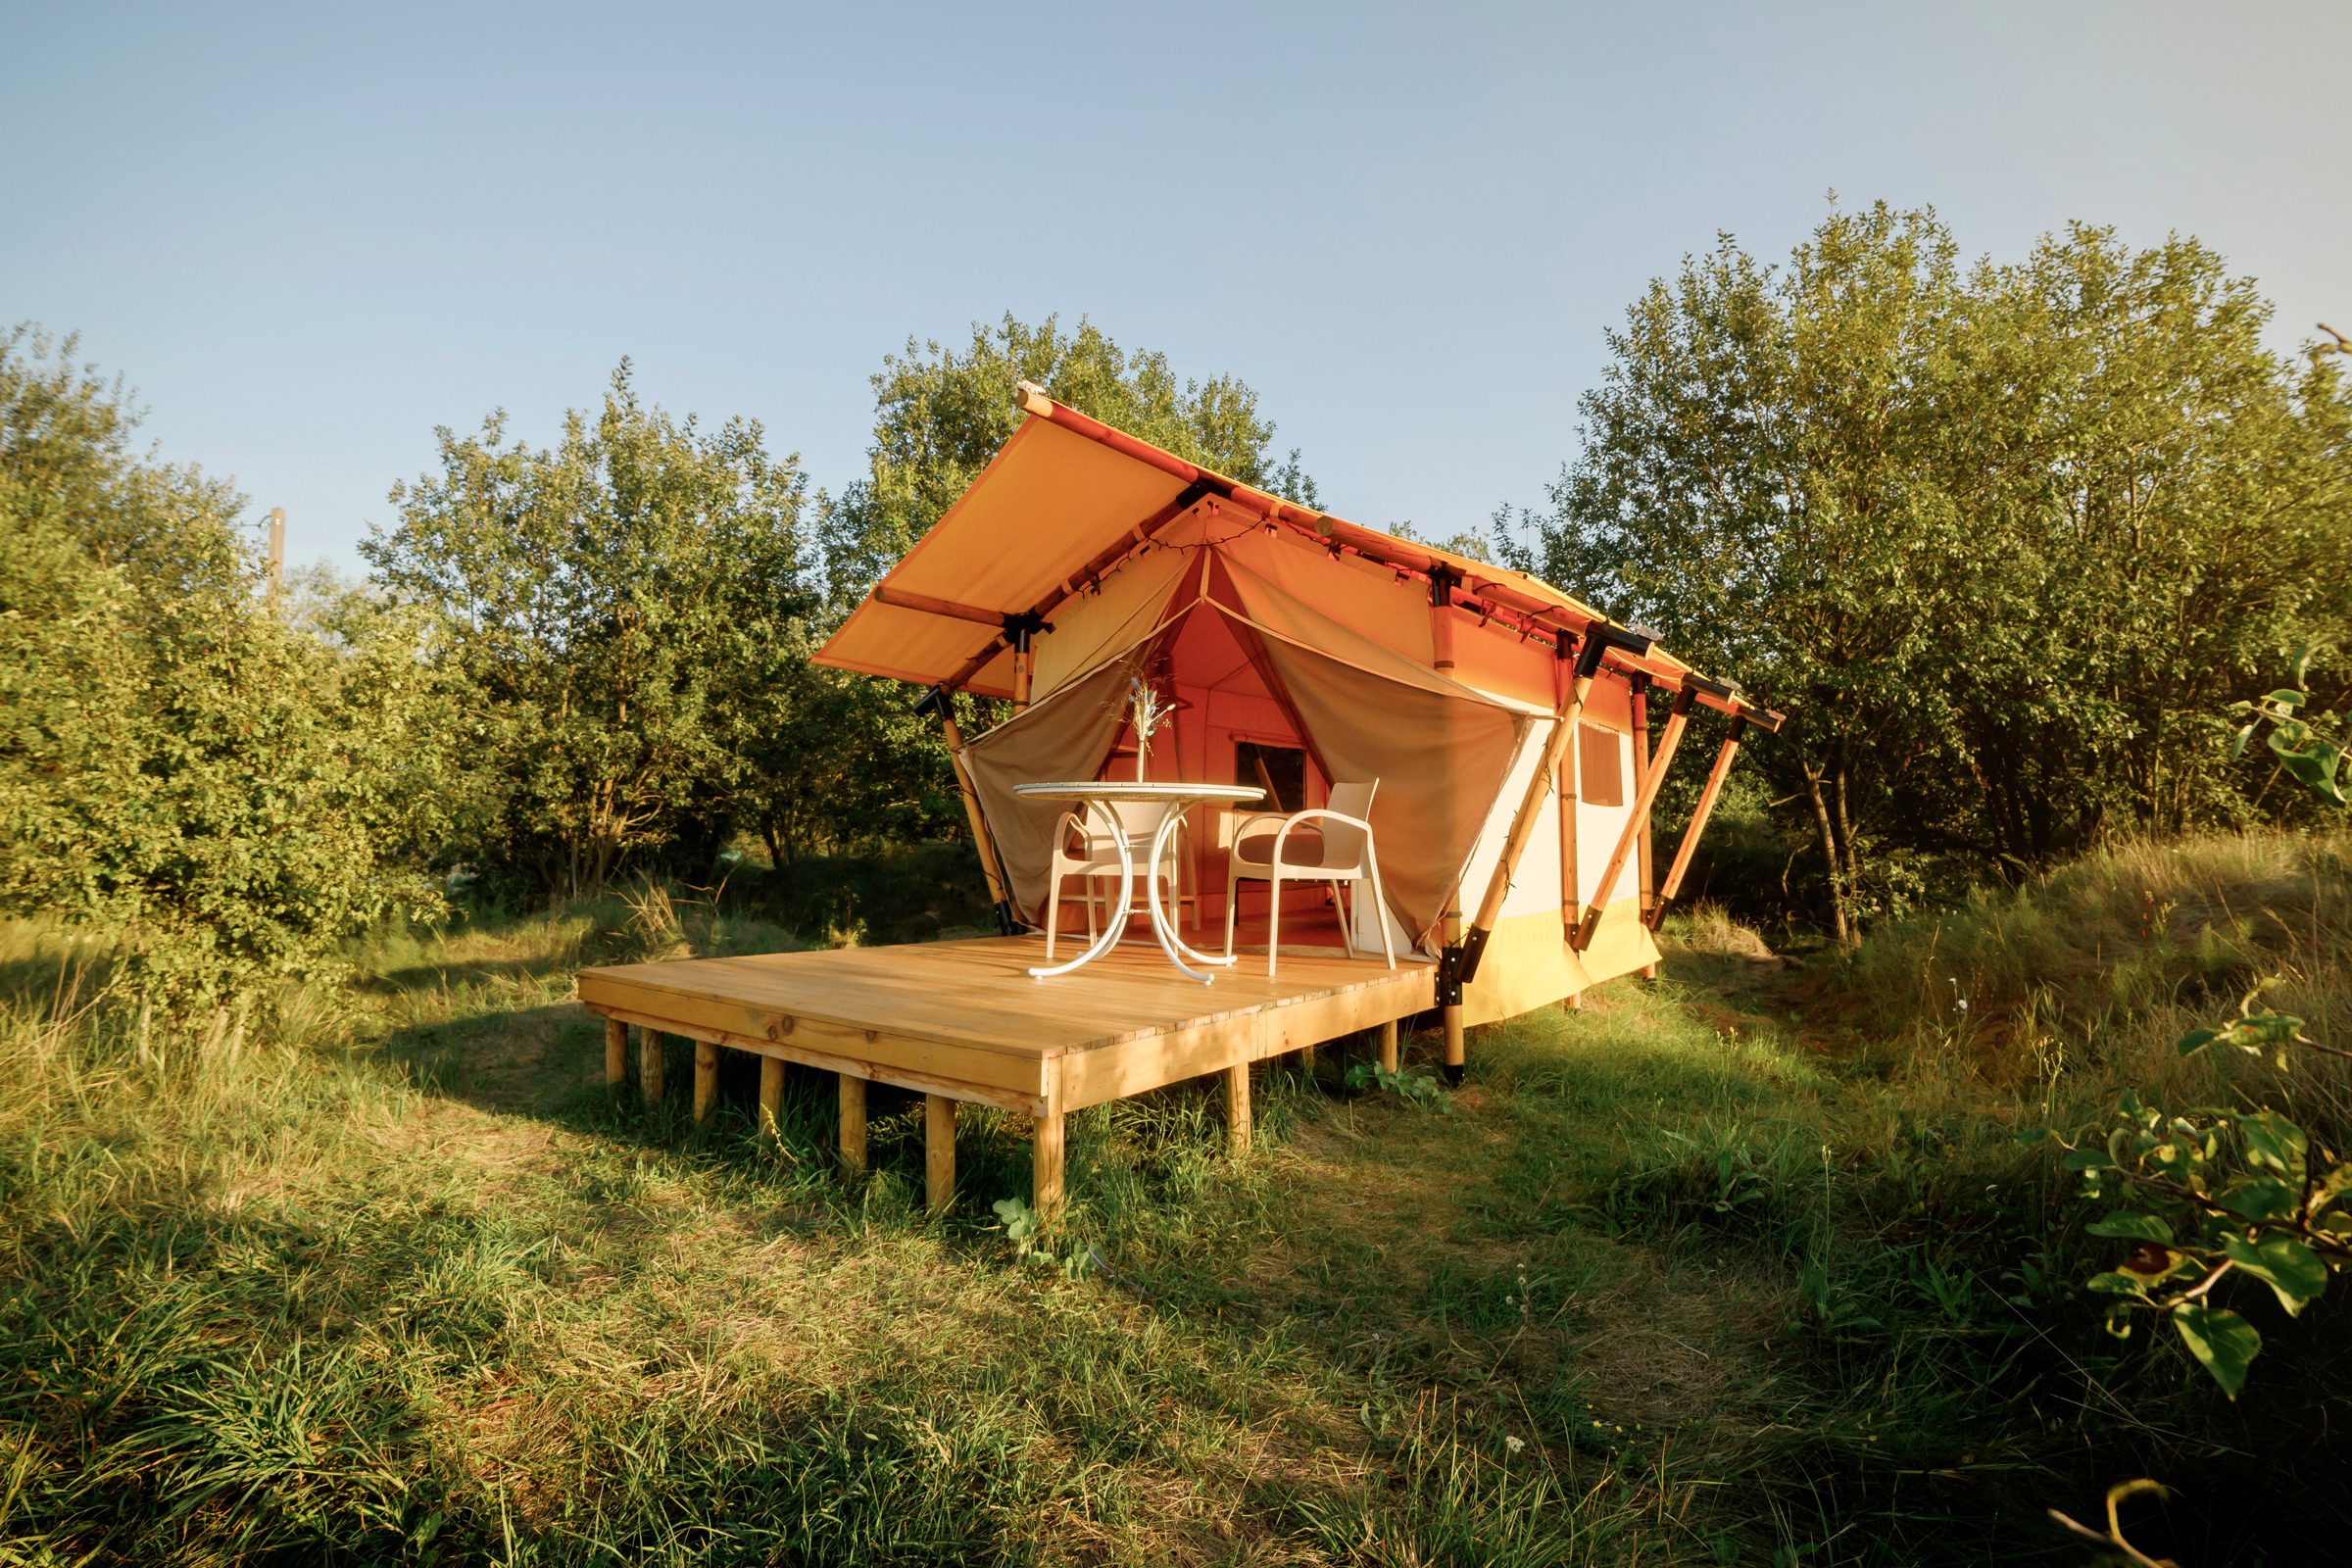 <p>If you long for a vacation filled with natural splendor, stargazing and s'mores<strong>—</strong>but setting up camp and going without a hot shower sound like the stuff of nightmares—glamping is your way to answer the call of the wild. <a href="https://www.rd.com/article/what-is-glamping/">What is glamping</a>, you ask? A portmanteau of "glamorous" and "camping," glamping is luxury camping that allows many creature comforts like running water, flushing toilets, swimming pools, air-conditioning, TVs, high-thread-count sheets, electricity—and the option to stand up straight without banging your head into the top of a tent. Glamping is also an excellent style of camping for beginners who want to dip a toe into appreciating nature without drowning in the deep end of pit toilets and shoe spider checks.</p> <p>And there's a ton of variety with both the setting and the type of accommodation. Canvas safari tents in a wooded wonderland are just the beginning. You could also try <a href="https://www.rd.com/list/yurt-camping/" rel="noopener noreferrer">yurt camping</a> at the beach, an updated Airstream in the desert or a luxe tent on the terrace of a five-star hotel. There are also properties outfitted with treehouses, old-school motorhomes, teepees, vintage circus trailers and transparent bubbles. To help you find the perfect tent that doesn't require you pitching it, we've rounded up the best luxury campsites in North America.</p> <h2>How we chose the best luxury camping sites</h2> <p>This outdoorsy travel trend has been steadily gaining popularity since the early 2000s, so there's no shortage of luxury camping options. But be warned: Not all glampgrounds are created equal. To come up with our list of the best, we sought out the luxury-camping brands that are providing stellar options, scoured star ratings and user reviews, consulted expert recommendations and called on our personal experiences with boutique camping.</p> <p><strong>Get <em>Reader's <b><i>Digest</i></b></em><b>’s</b> </strong><a href="https://www.rd.com/newsletter/?int_source=direct&int_medium=rd.com&int_campaign=nlrda_20221001_topperformingcontentnlsignup&int_placement=incontent" rel="noopener noreferrer"><strong>Read Up newsletter</strong></a><strong> for more travel, humor, cleaning, tech and fun facts all week long.</strong></p>